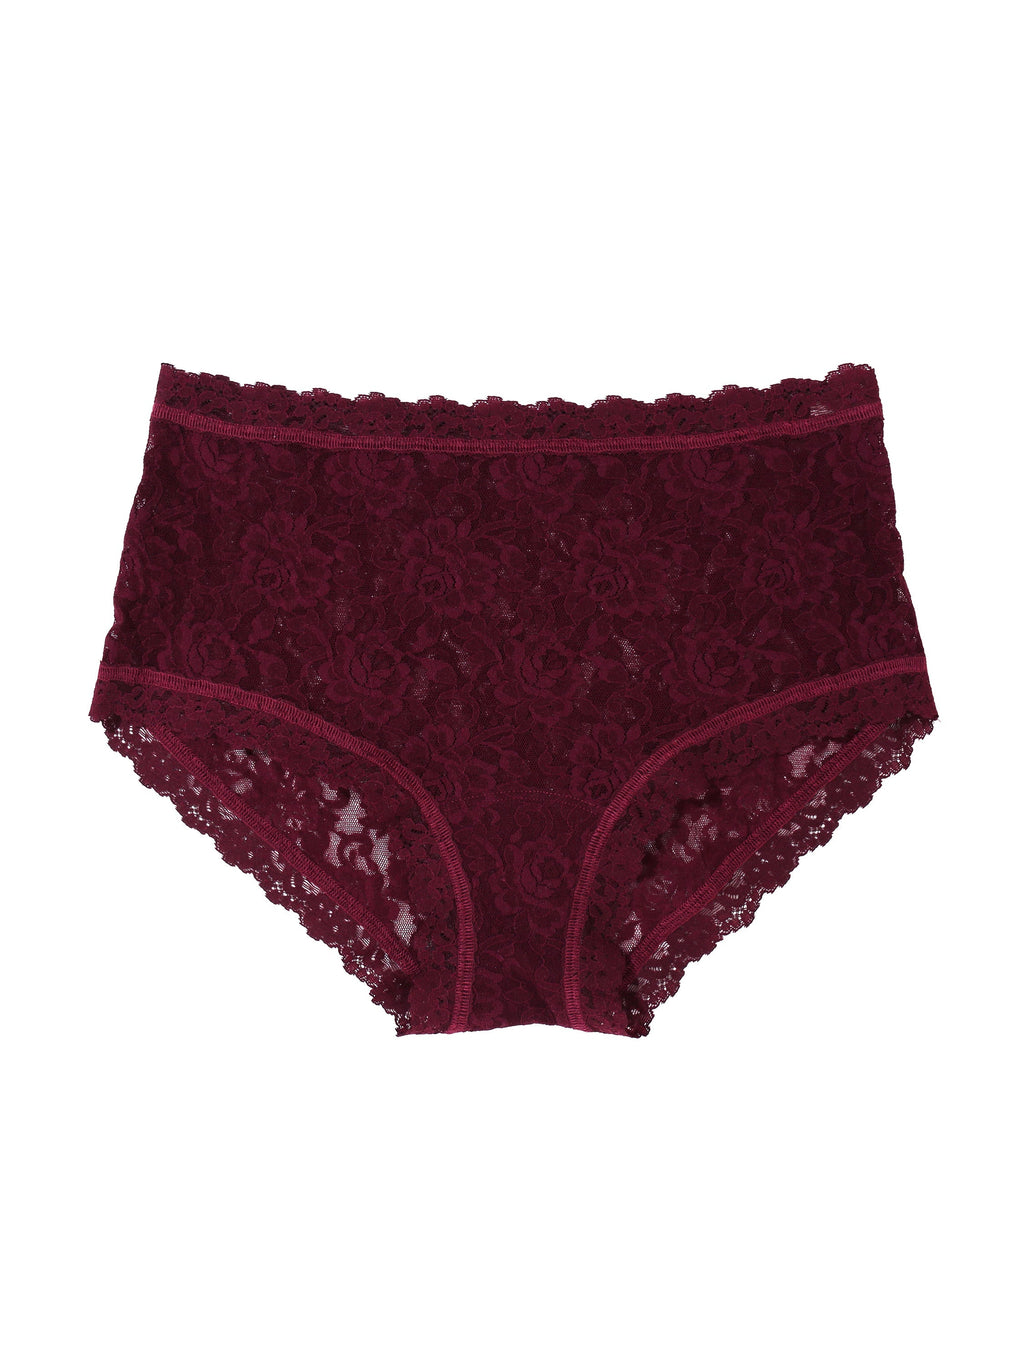 Signature Lace High Rise Boyshort Dried Cherry Red Sale | Hanky Panky